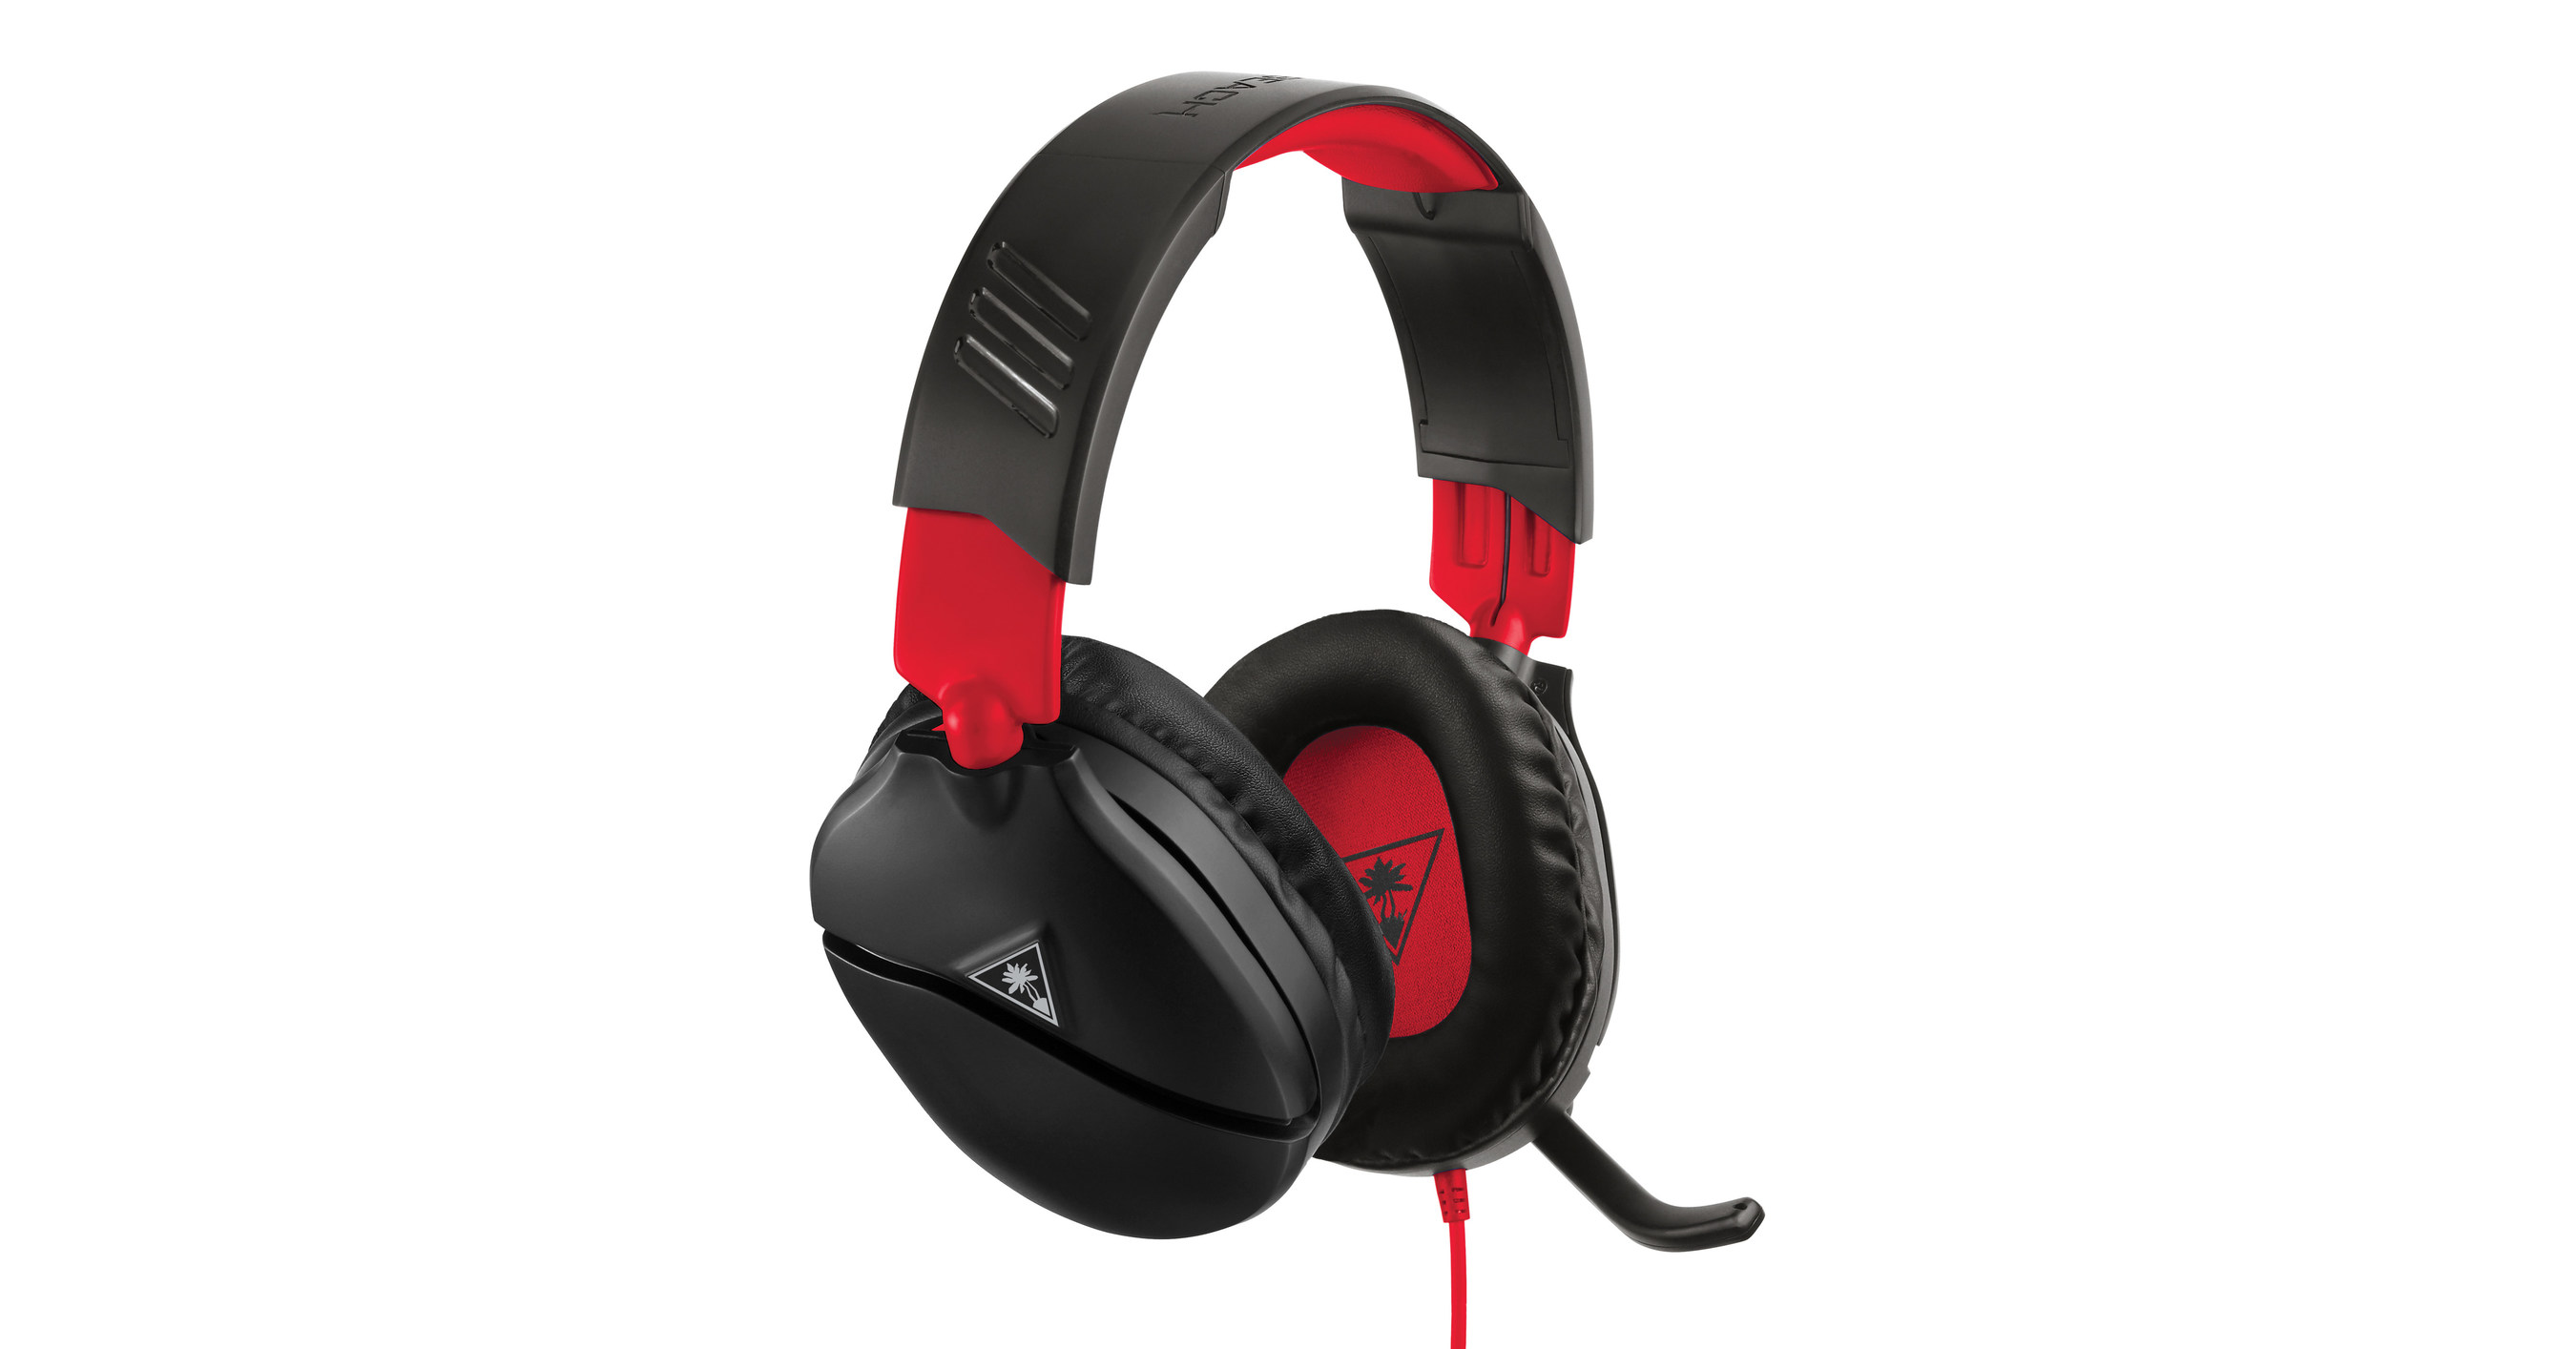 Recon 70 Gaming Headset for Nintendo Switch™ – Turtle Beach®